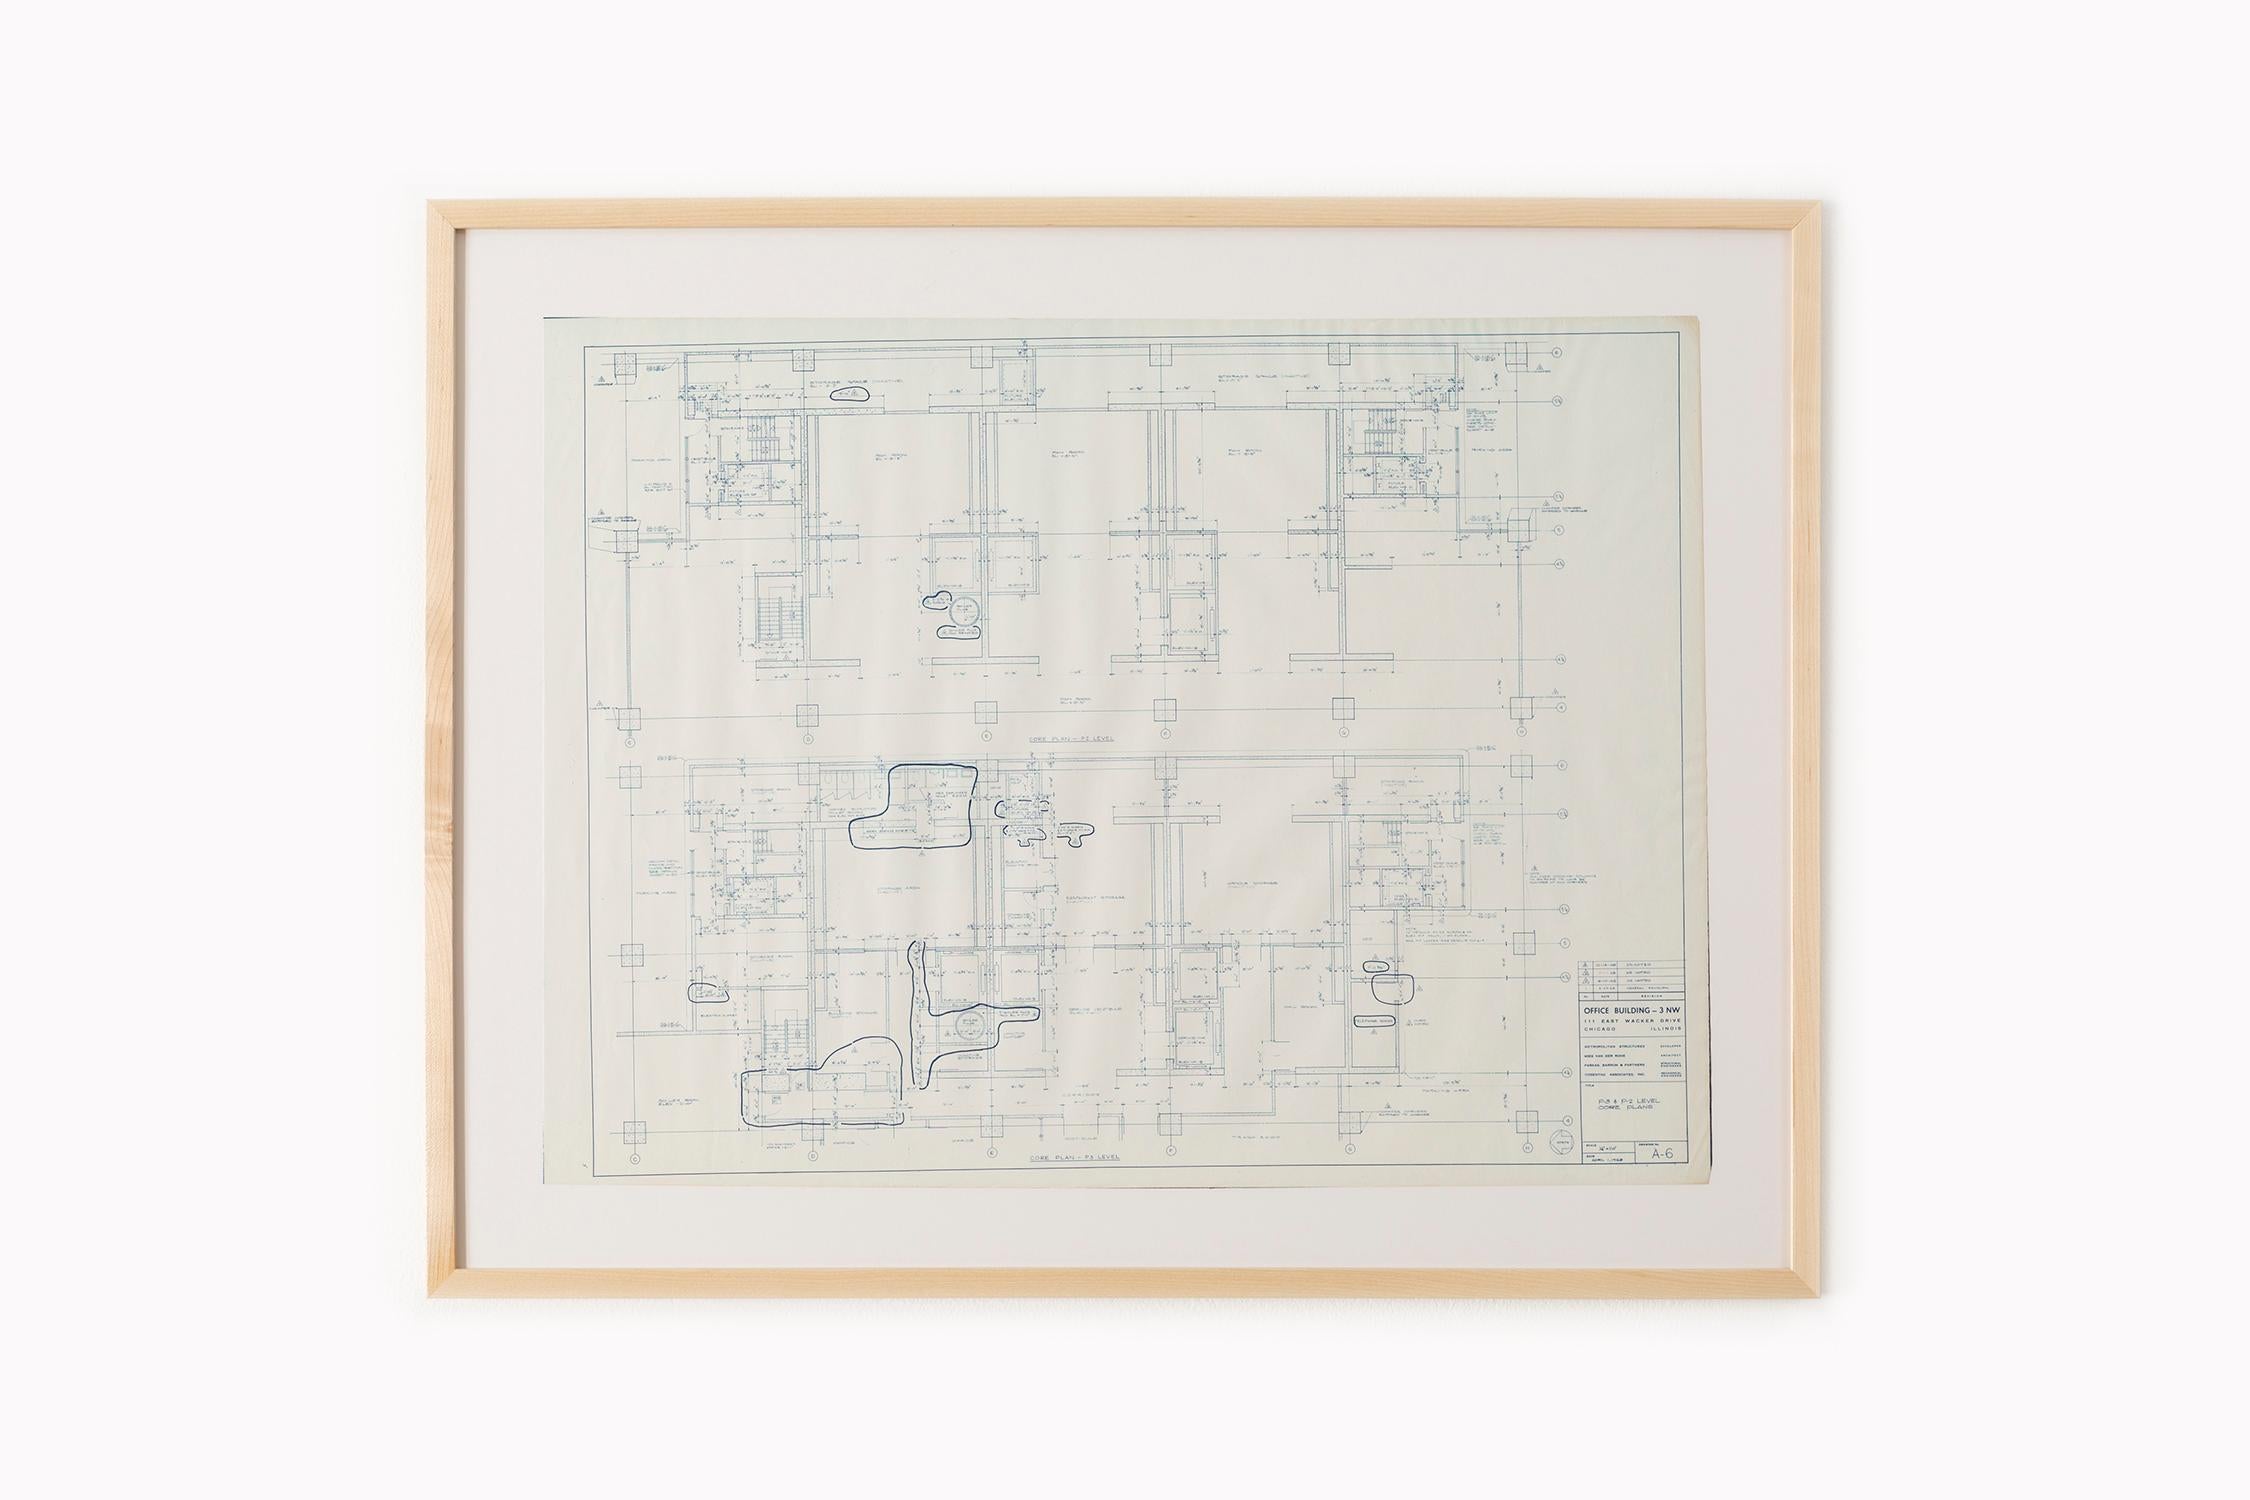 Mies van der Rohe Blueprint, One Charles Center, Baltimore 1961, Elevations  For Sale 2